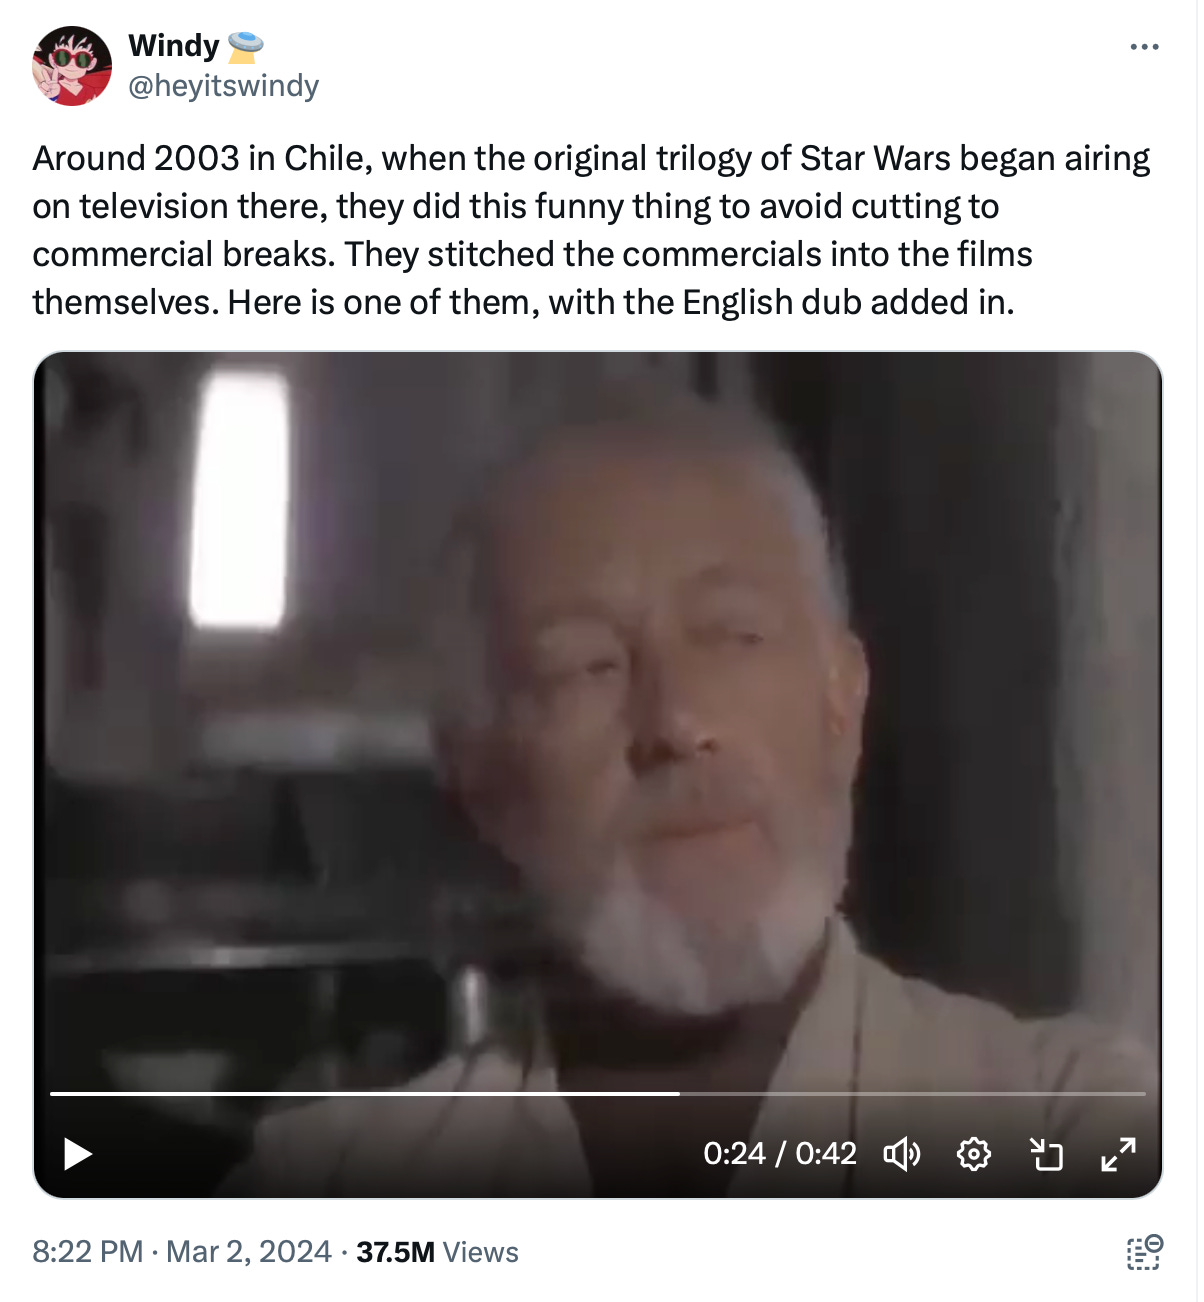 Heyitswindy's tweet: Around 2003 in Chile, when the original trilogy of Star Wars began airing on television there, they did this funny thing to avoid cutting to commercial breaks. They stitched the commercials into the films themselves. Here is one of them, with the English dub added in.